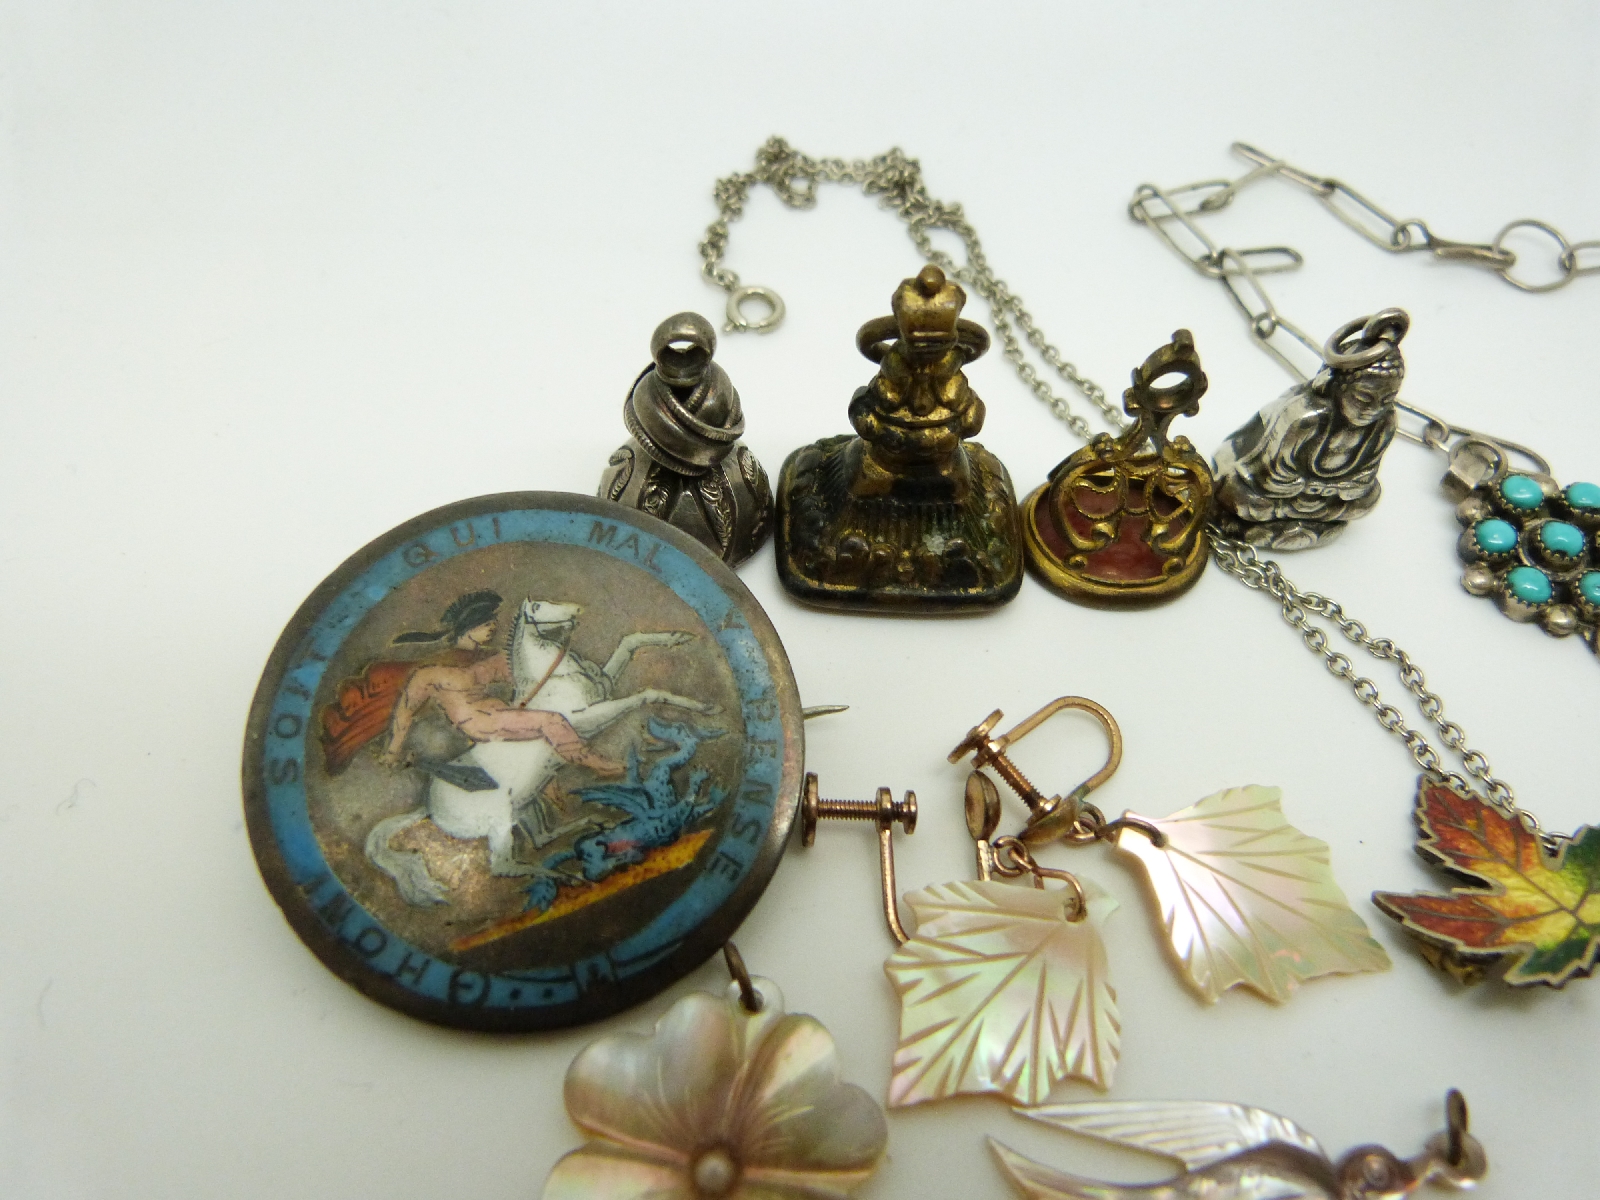 A silver charm in the form of Guanyin, micro mosaic pendant, silver cufflinks, - Image 4 of 7